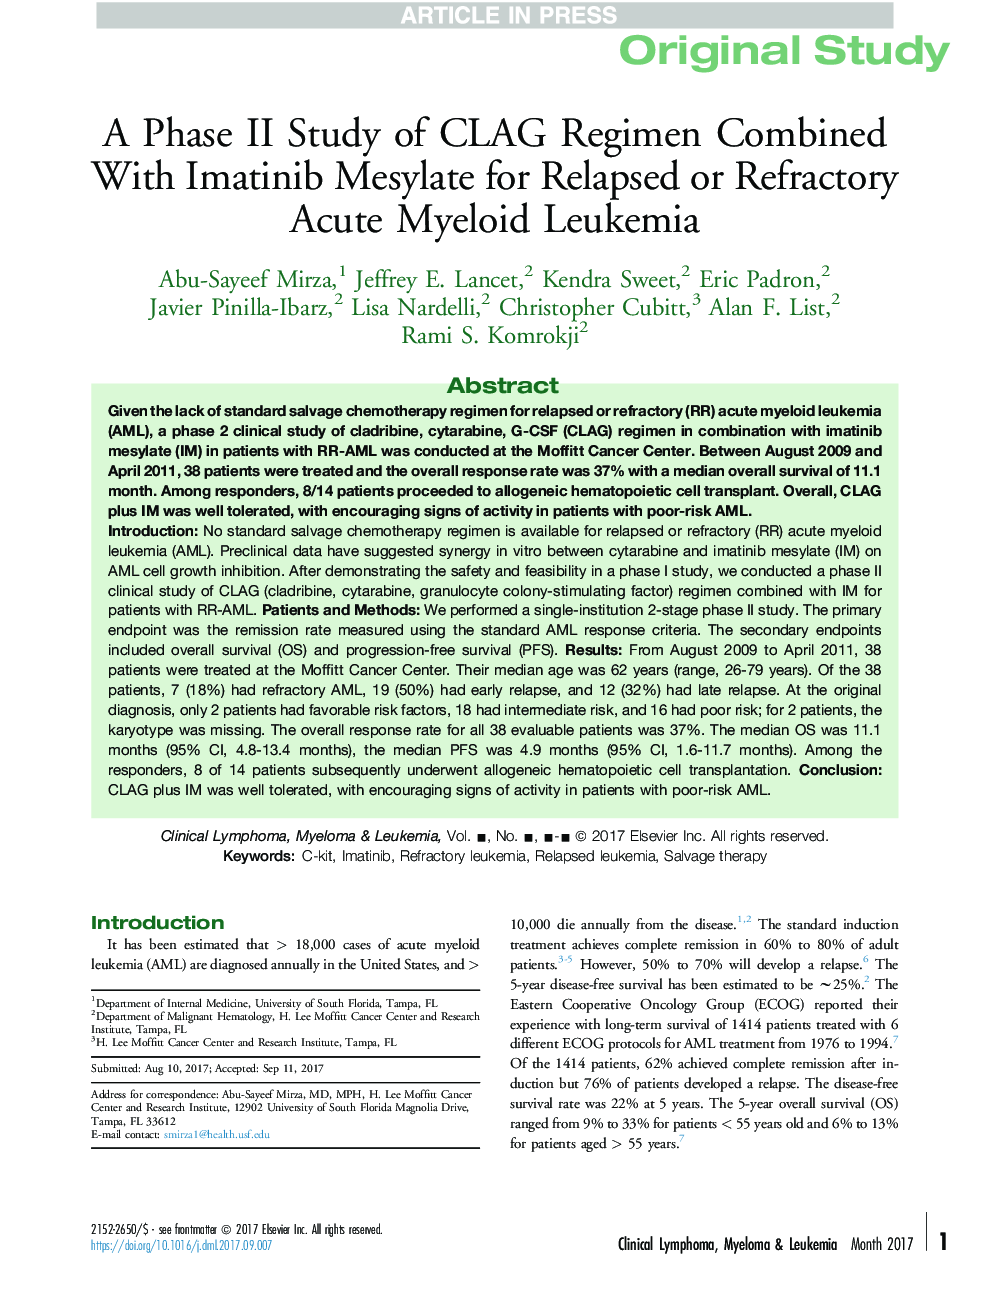 A Phase II Study of CLAG Regimen Combined With Imatinib Mesylate for Relapsed or Refractory Acute Myeloid Leukemia